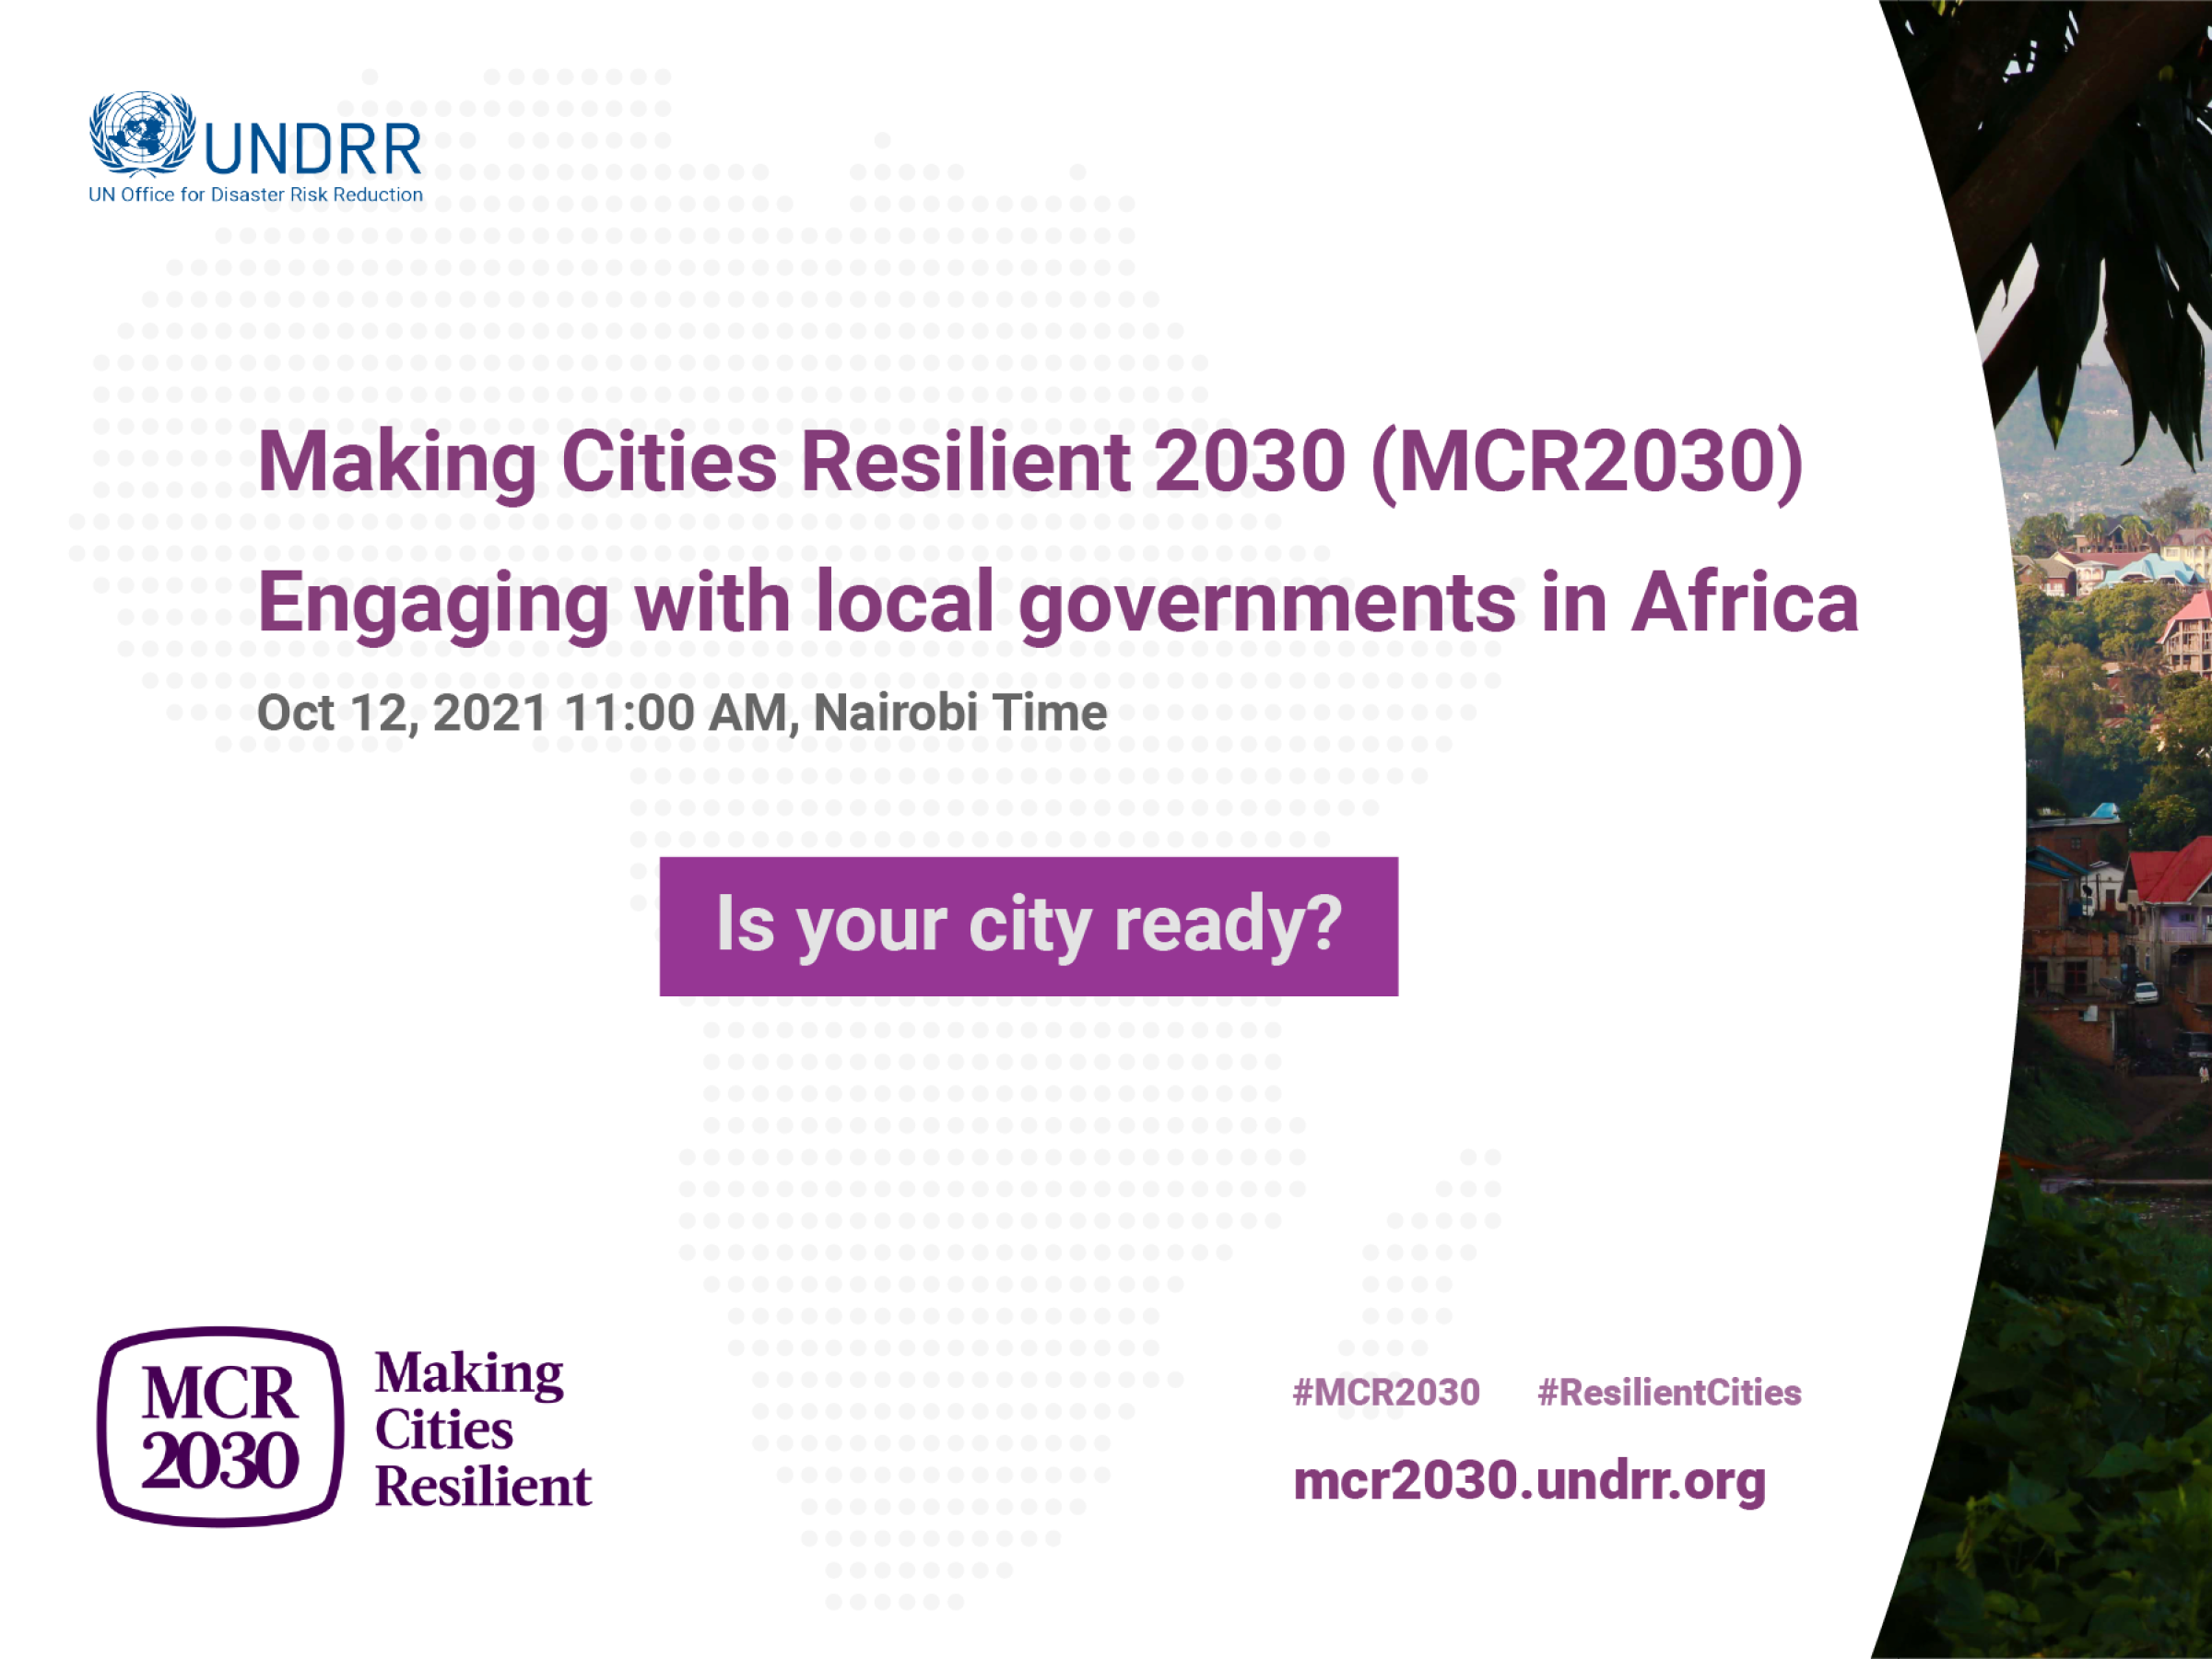 Make Cities Resilient 2030